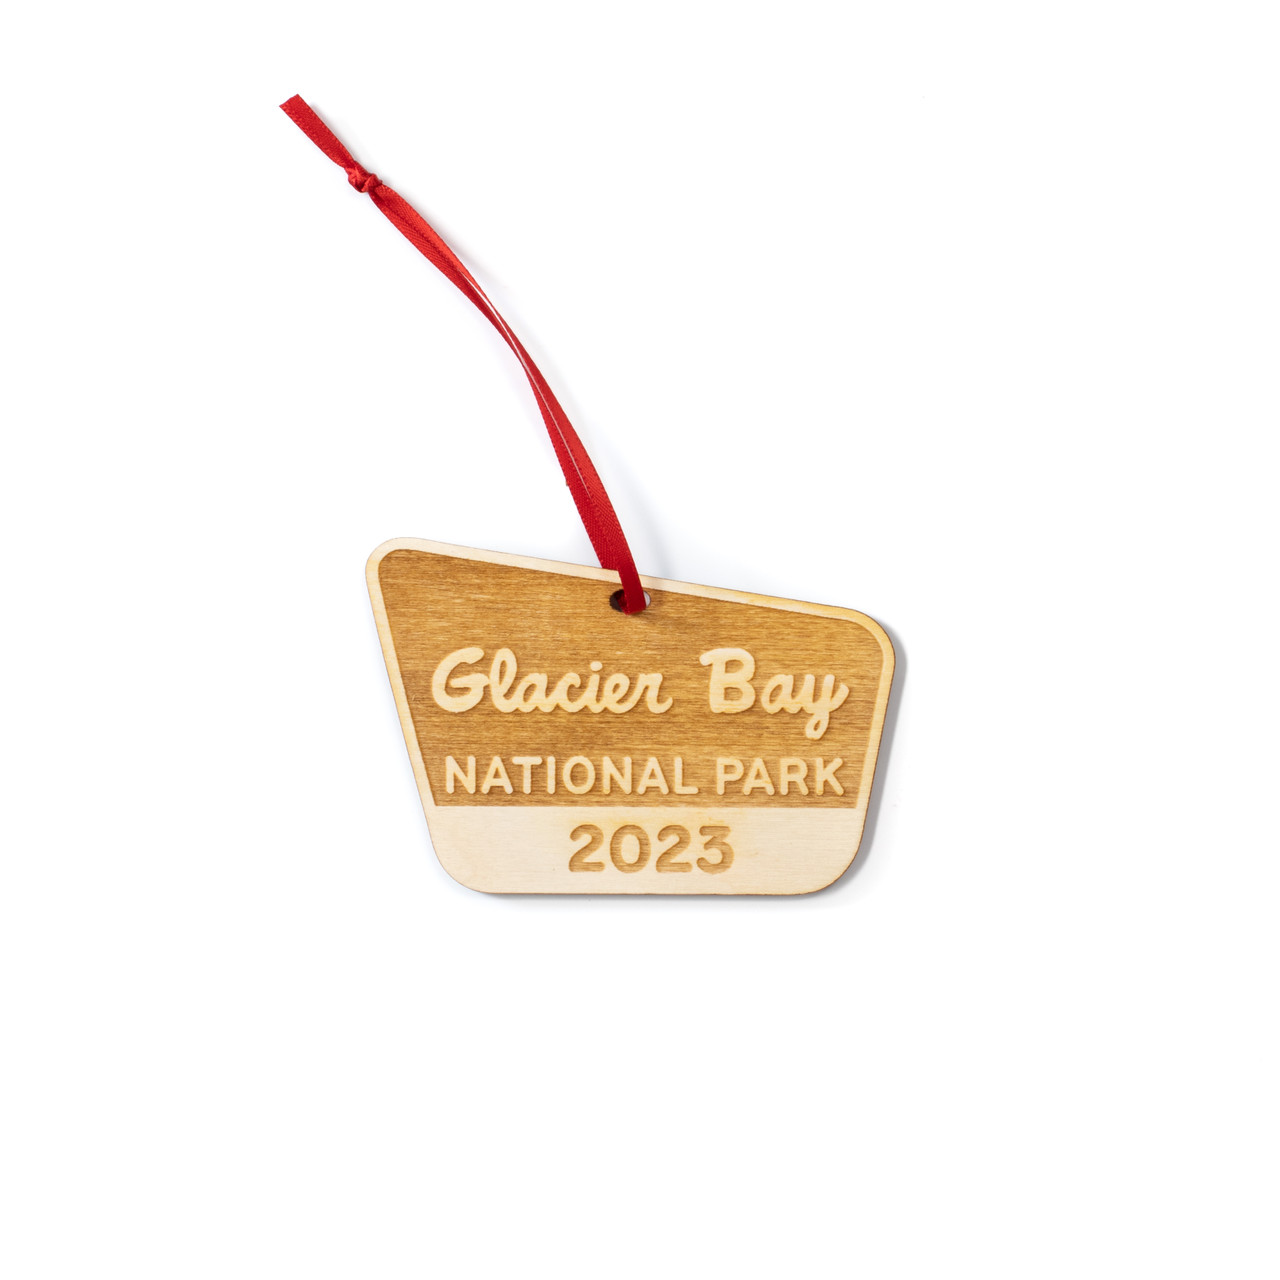 A charming engraved wooden ornament of Glacier Bay National Park: A perfect souvenir to remember the stunning landscapes and natural beauty of the park.